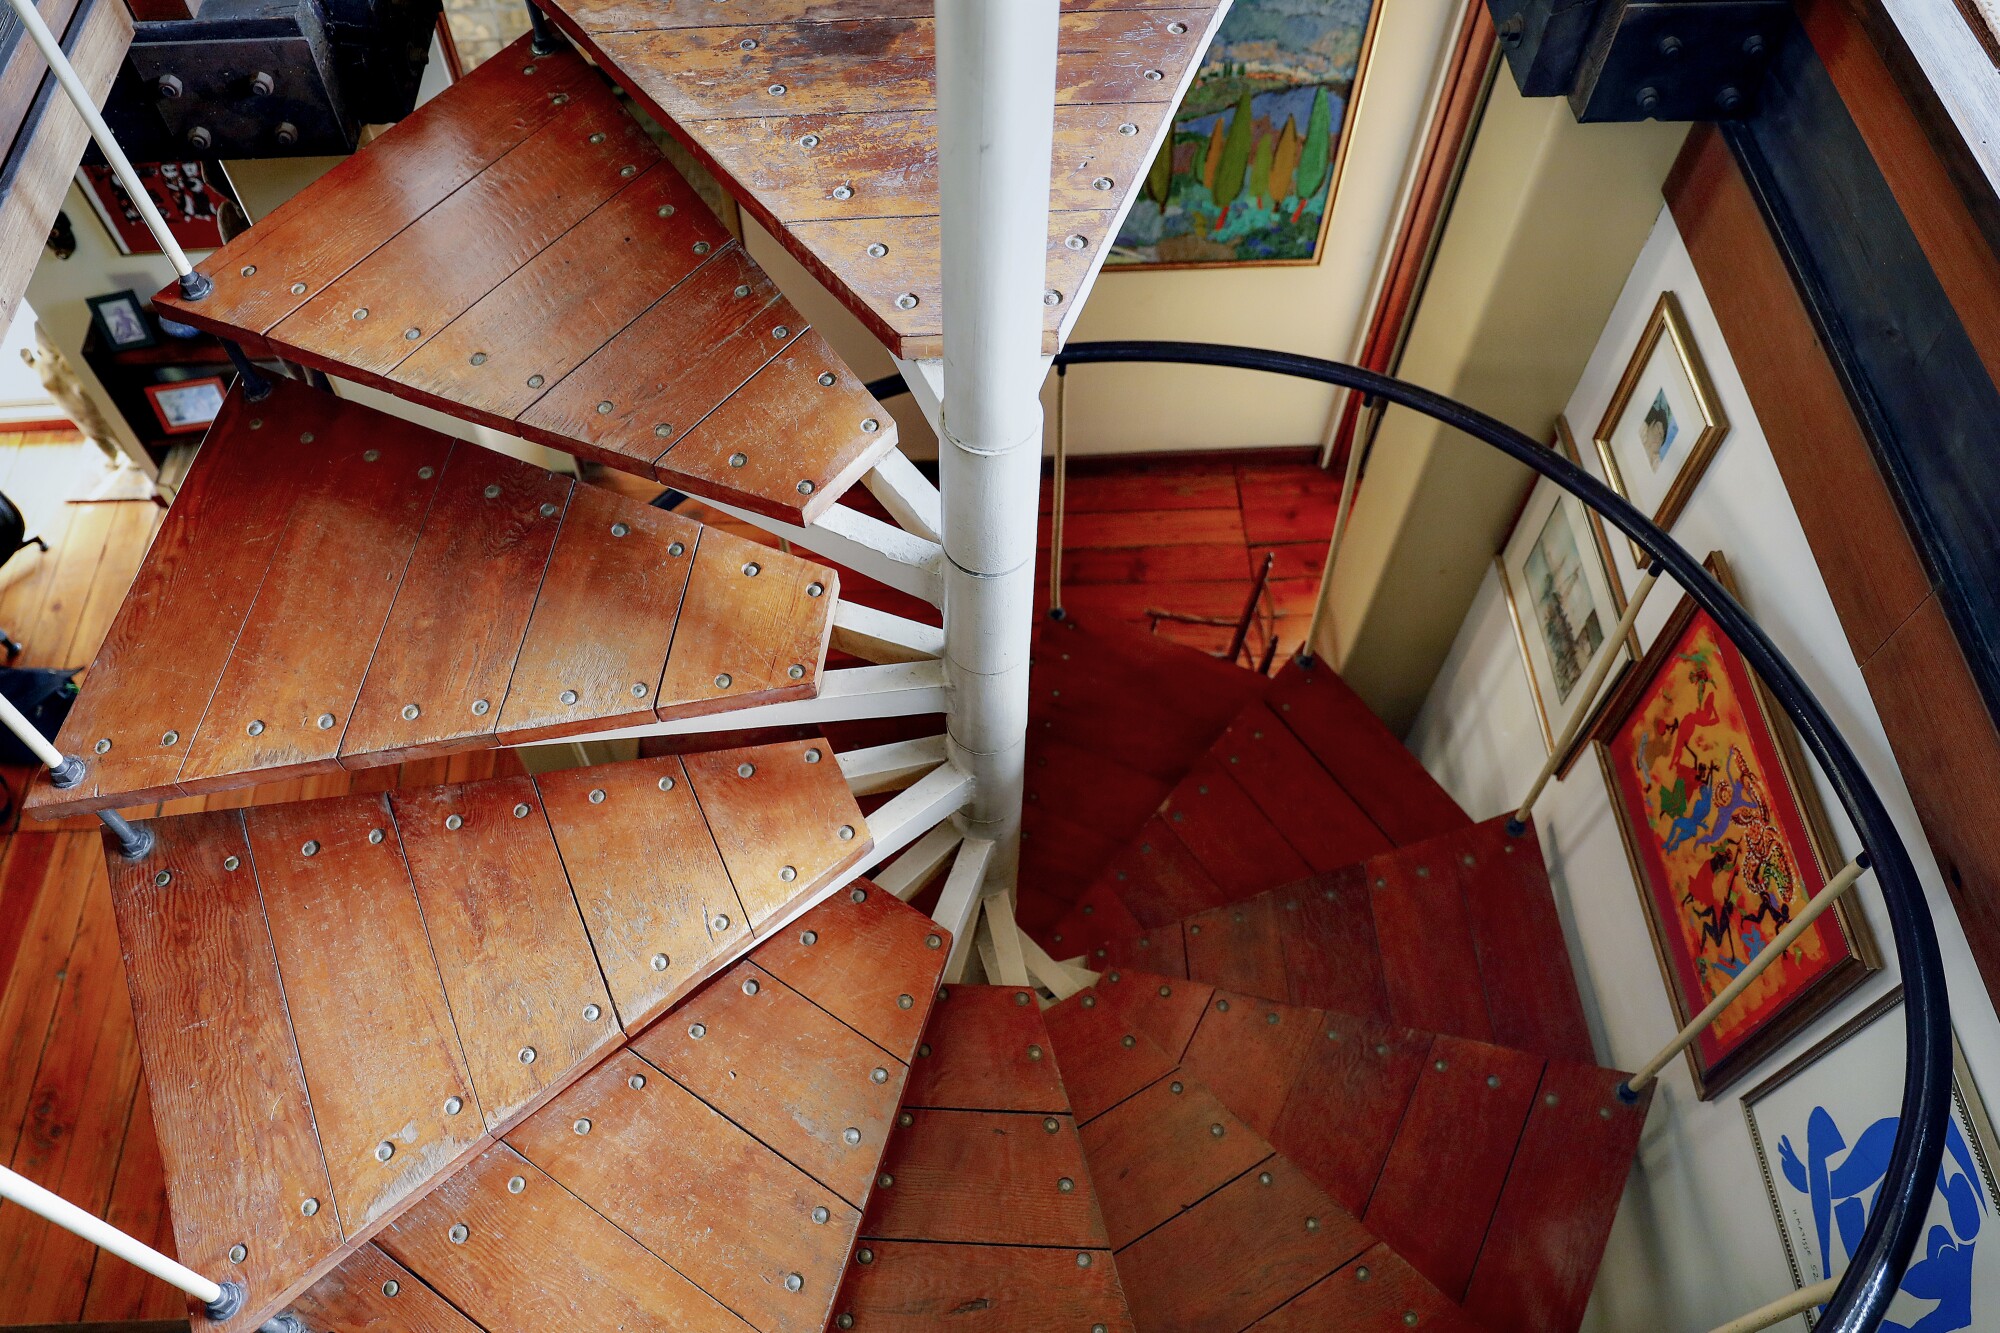 The wooden spiral staircase of Bernard Judge's treehouse seen from above